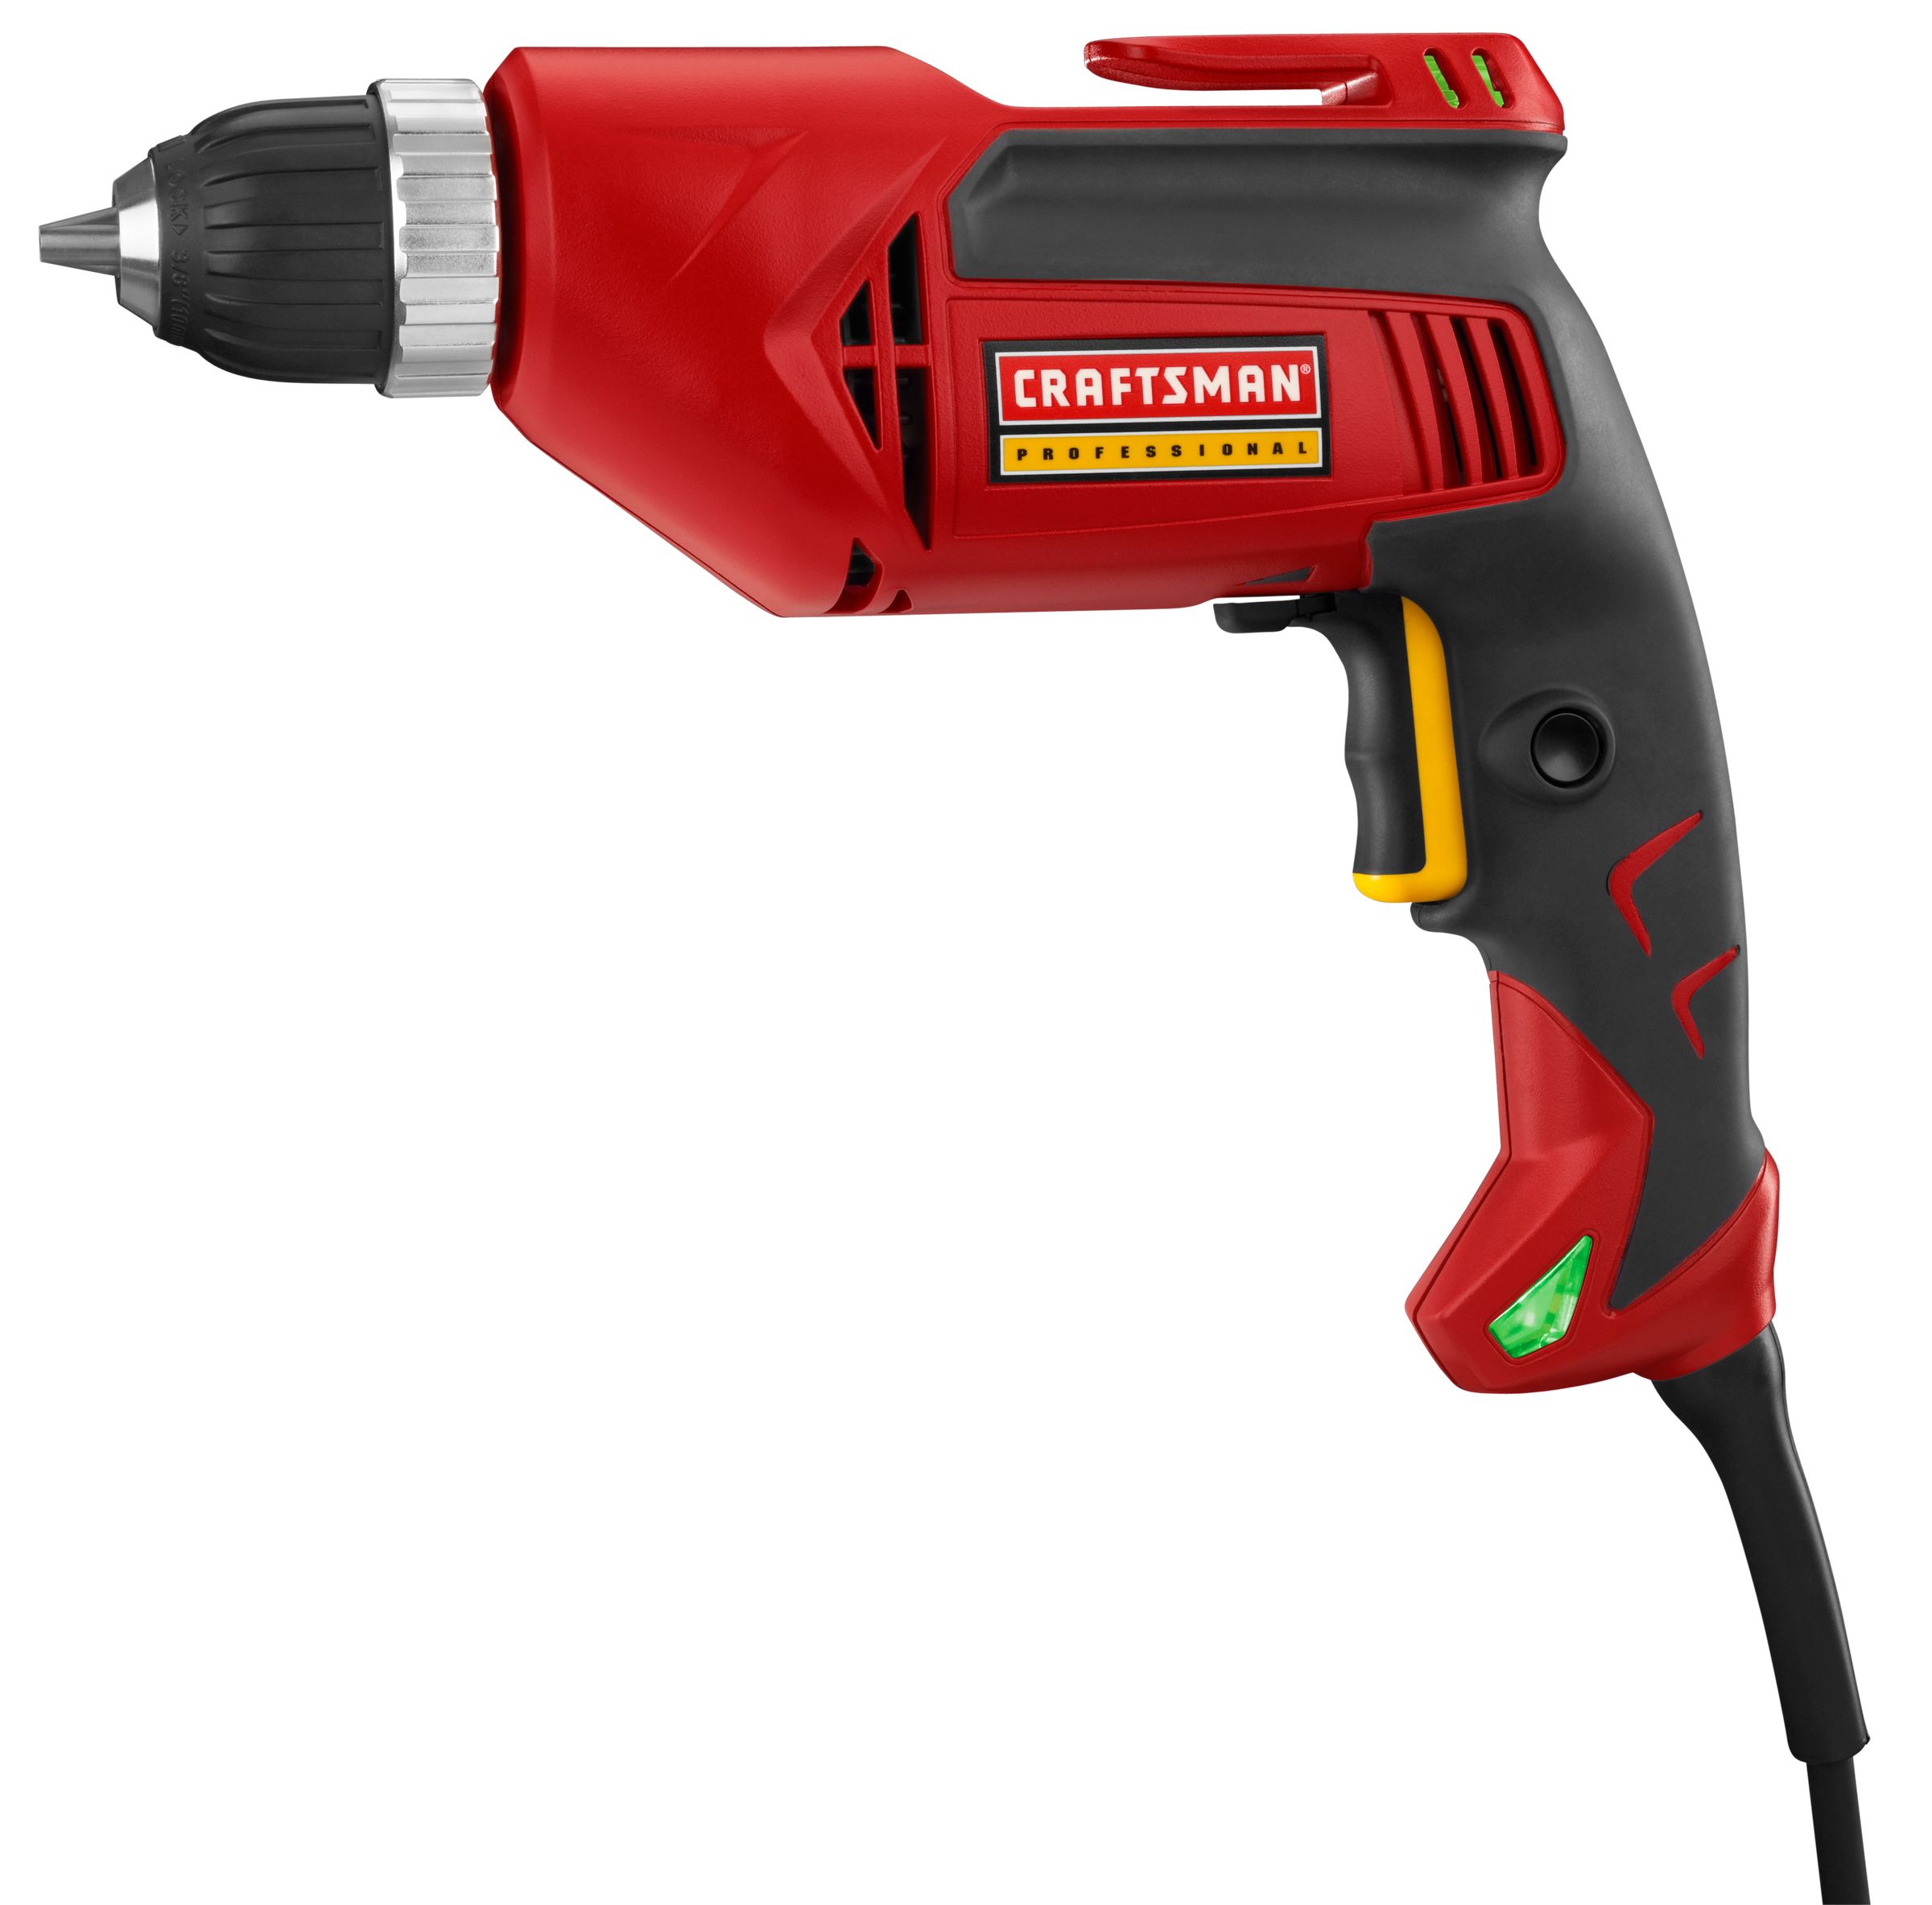 Craftsman 3/8 inch Pro Drill: Drill it with Sears